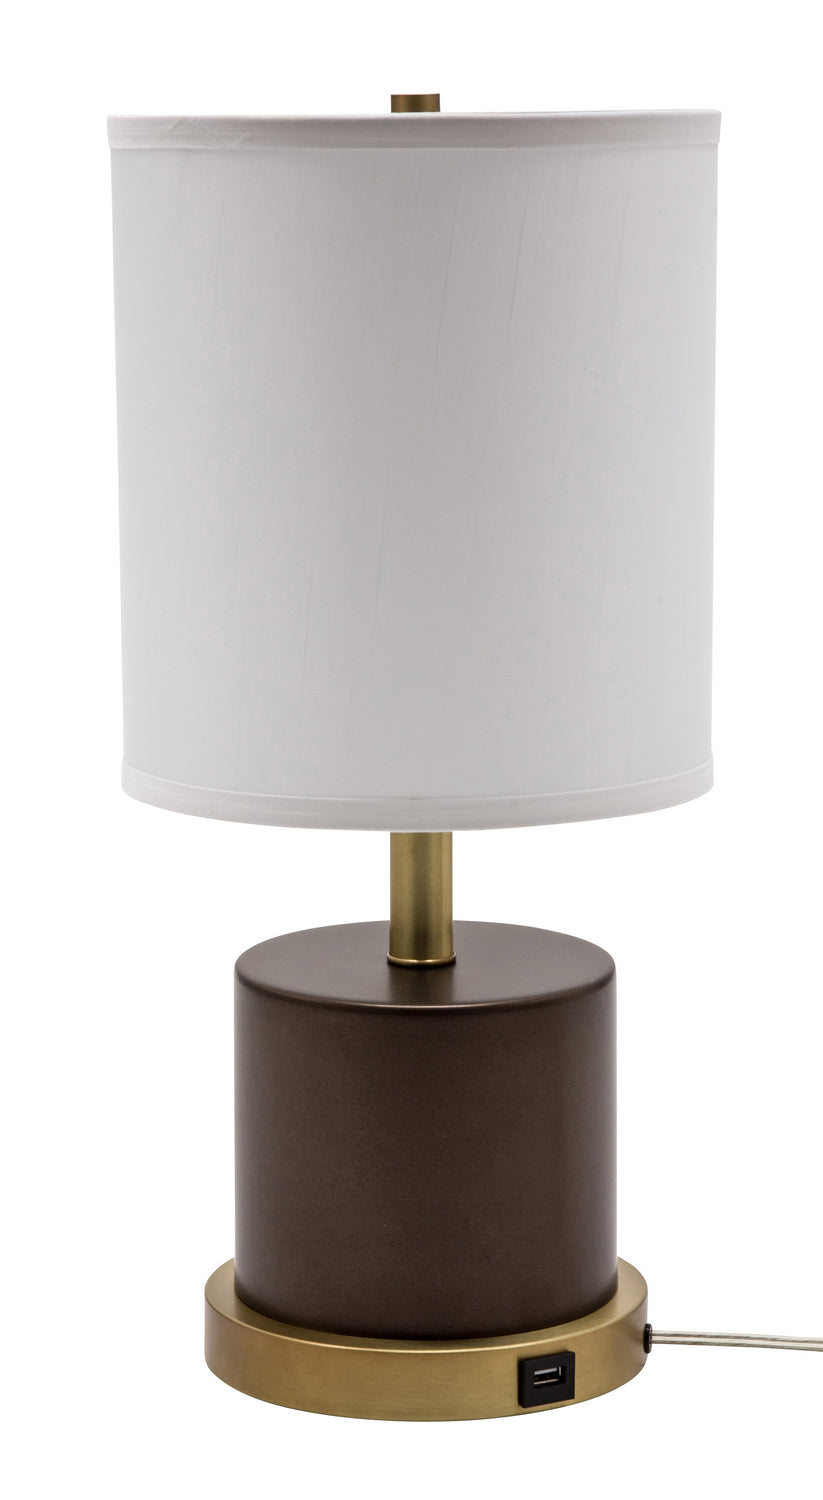 House of Troy - RU752-CHB - One Light Table Lamp - Rupert - Chestnut Bronze With Weathered Brass Accents